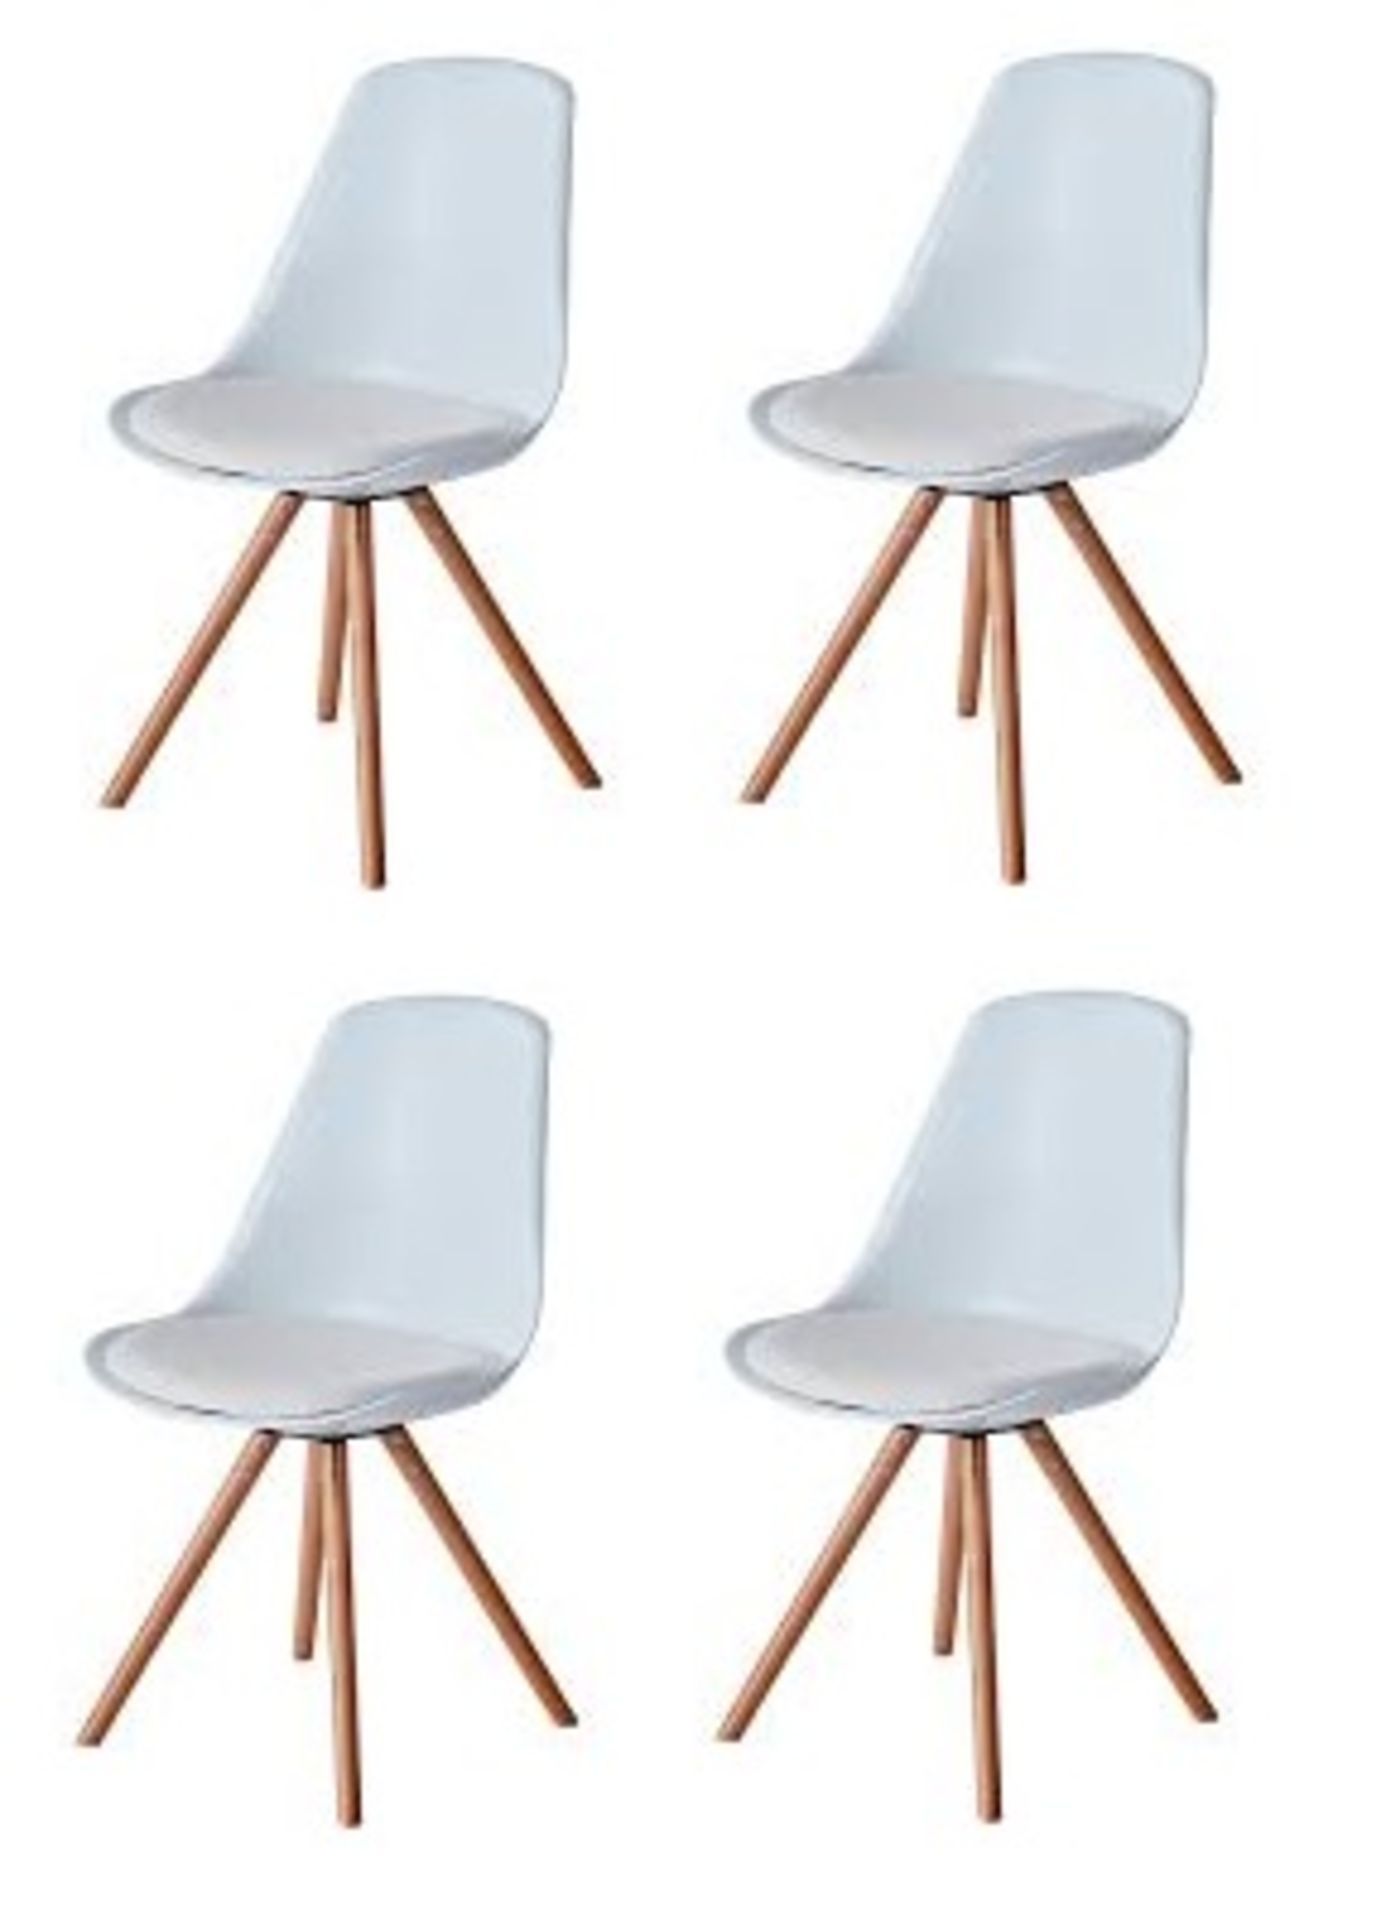 Set of 4 x 'TURNER' Contemporary Scandinavian-style Dining Chairs in White - Mid Century Design With